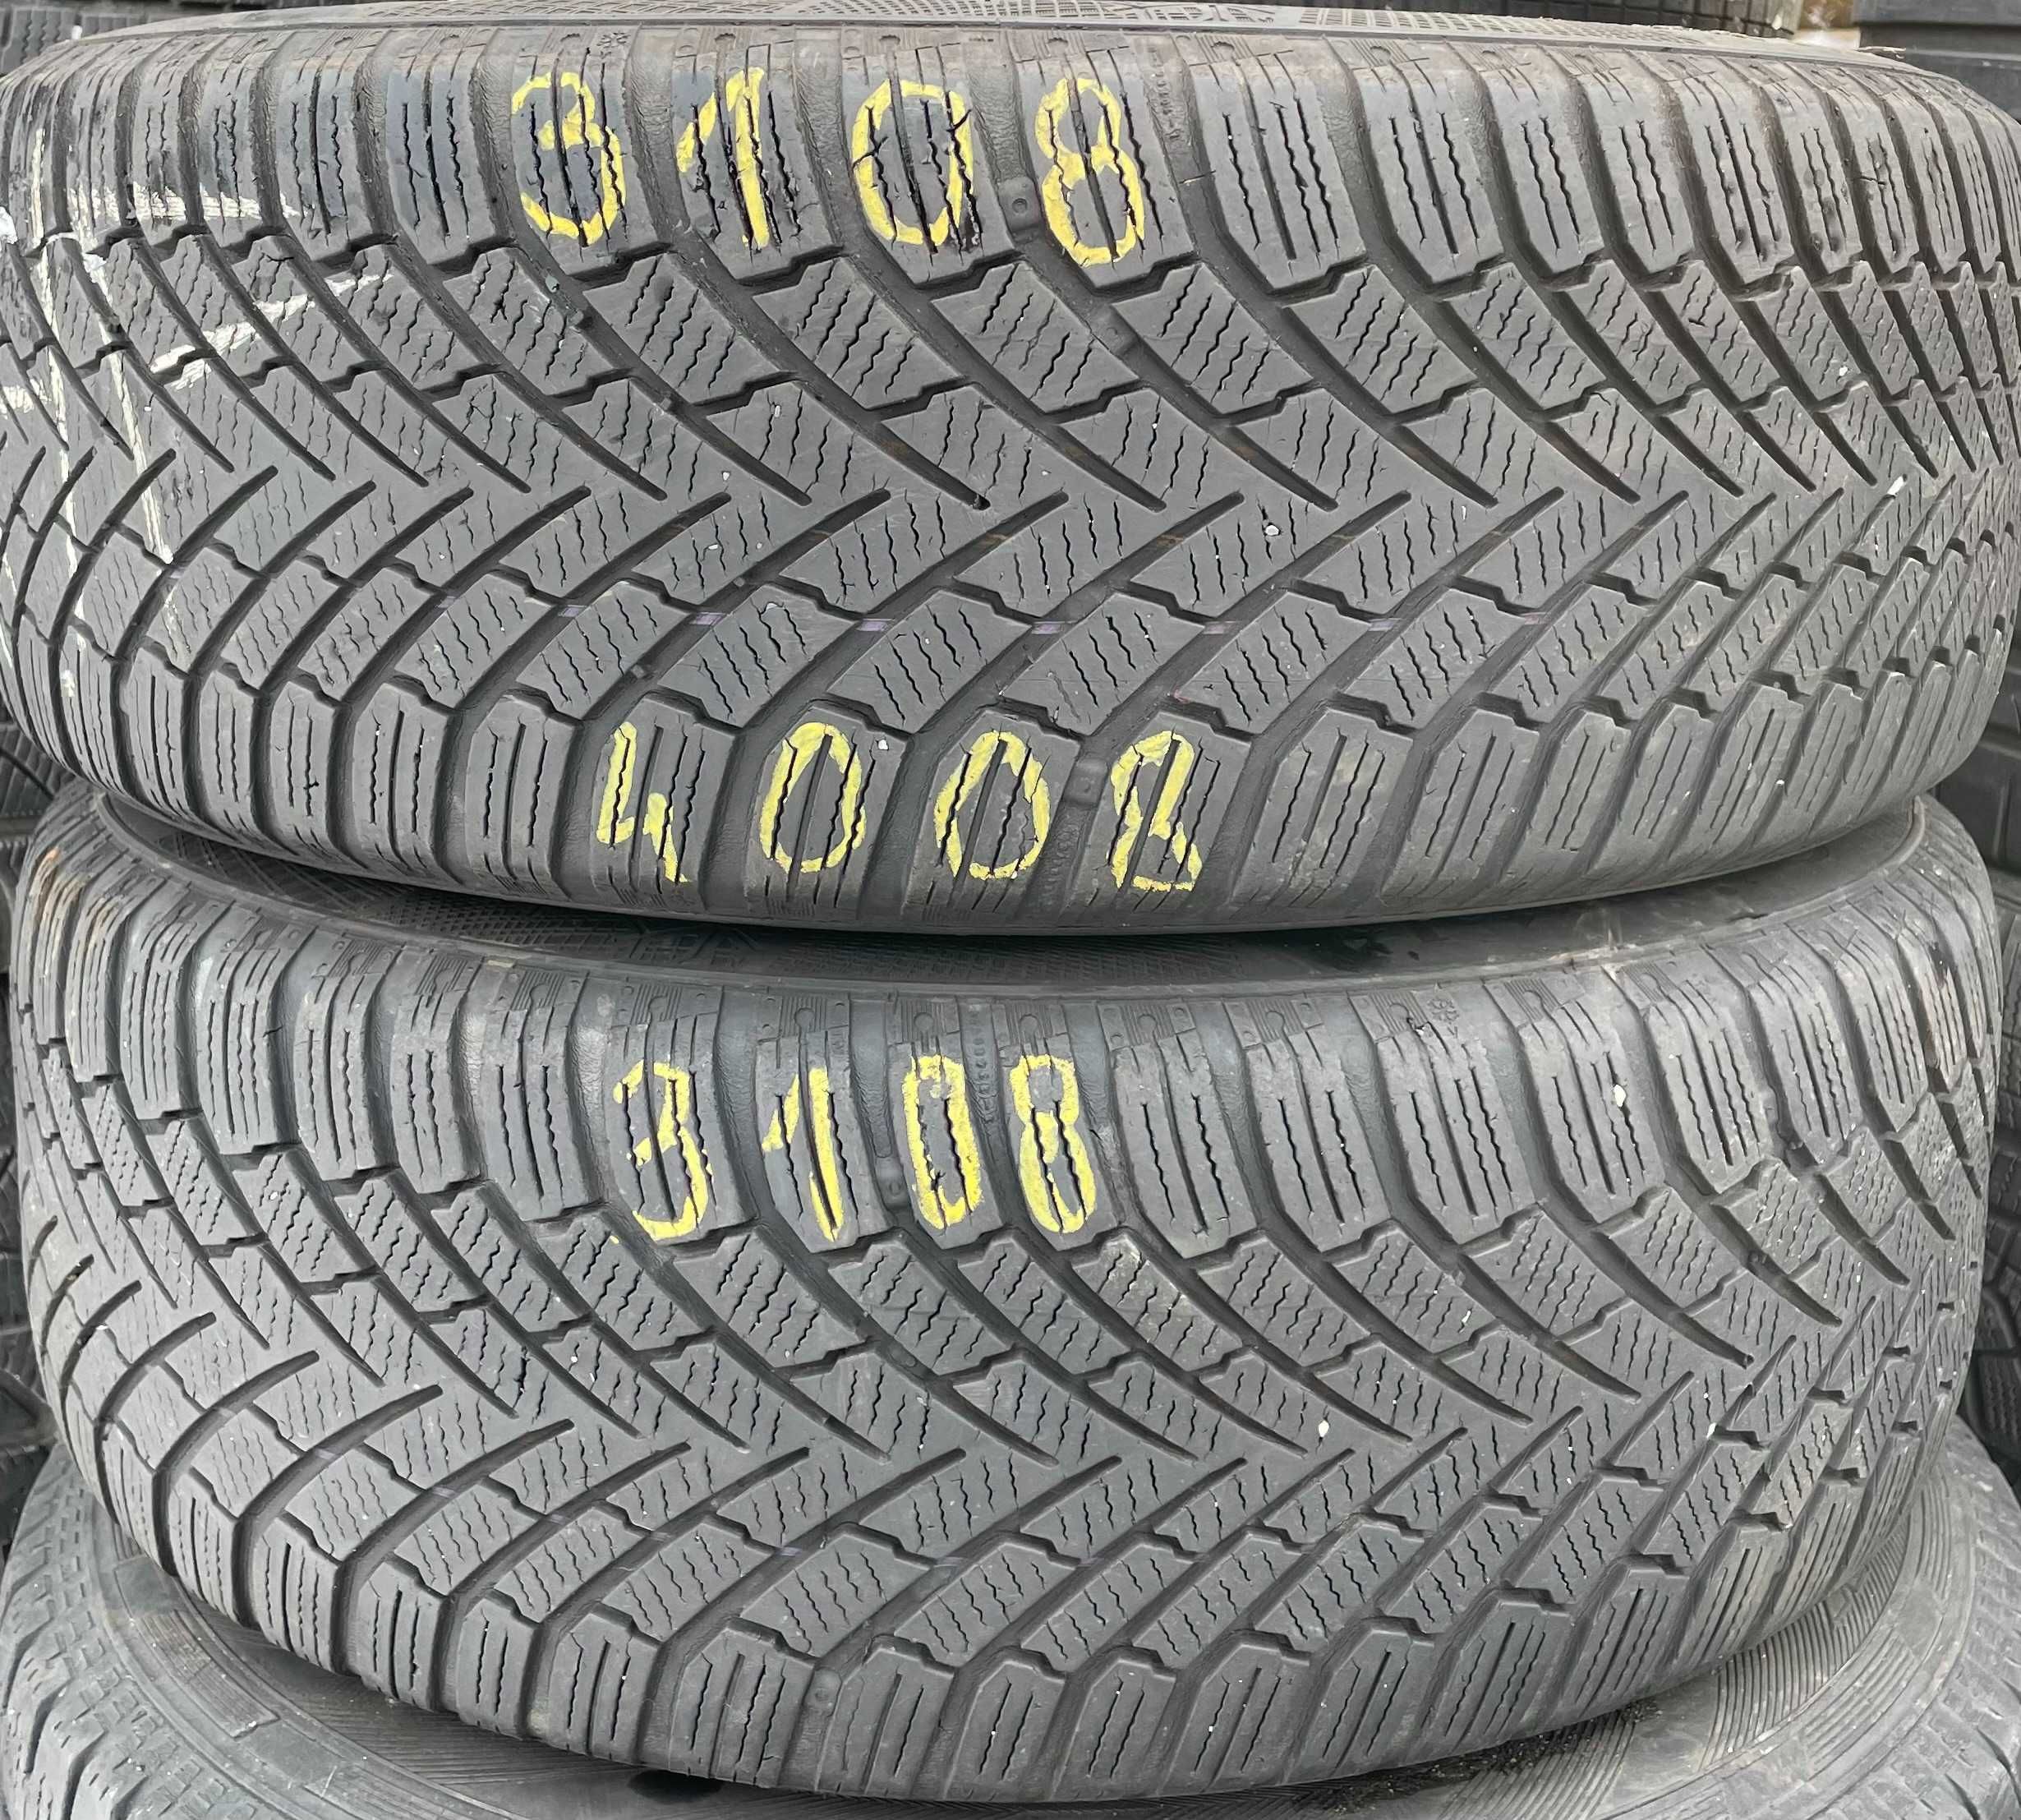 2x Continental Winter Contact TS860 205/55 R16 91H / 3108